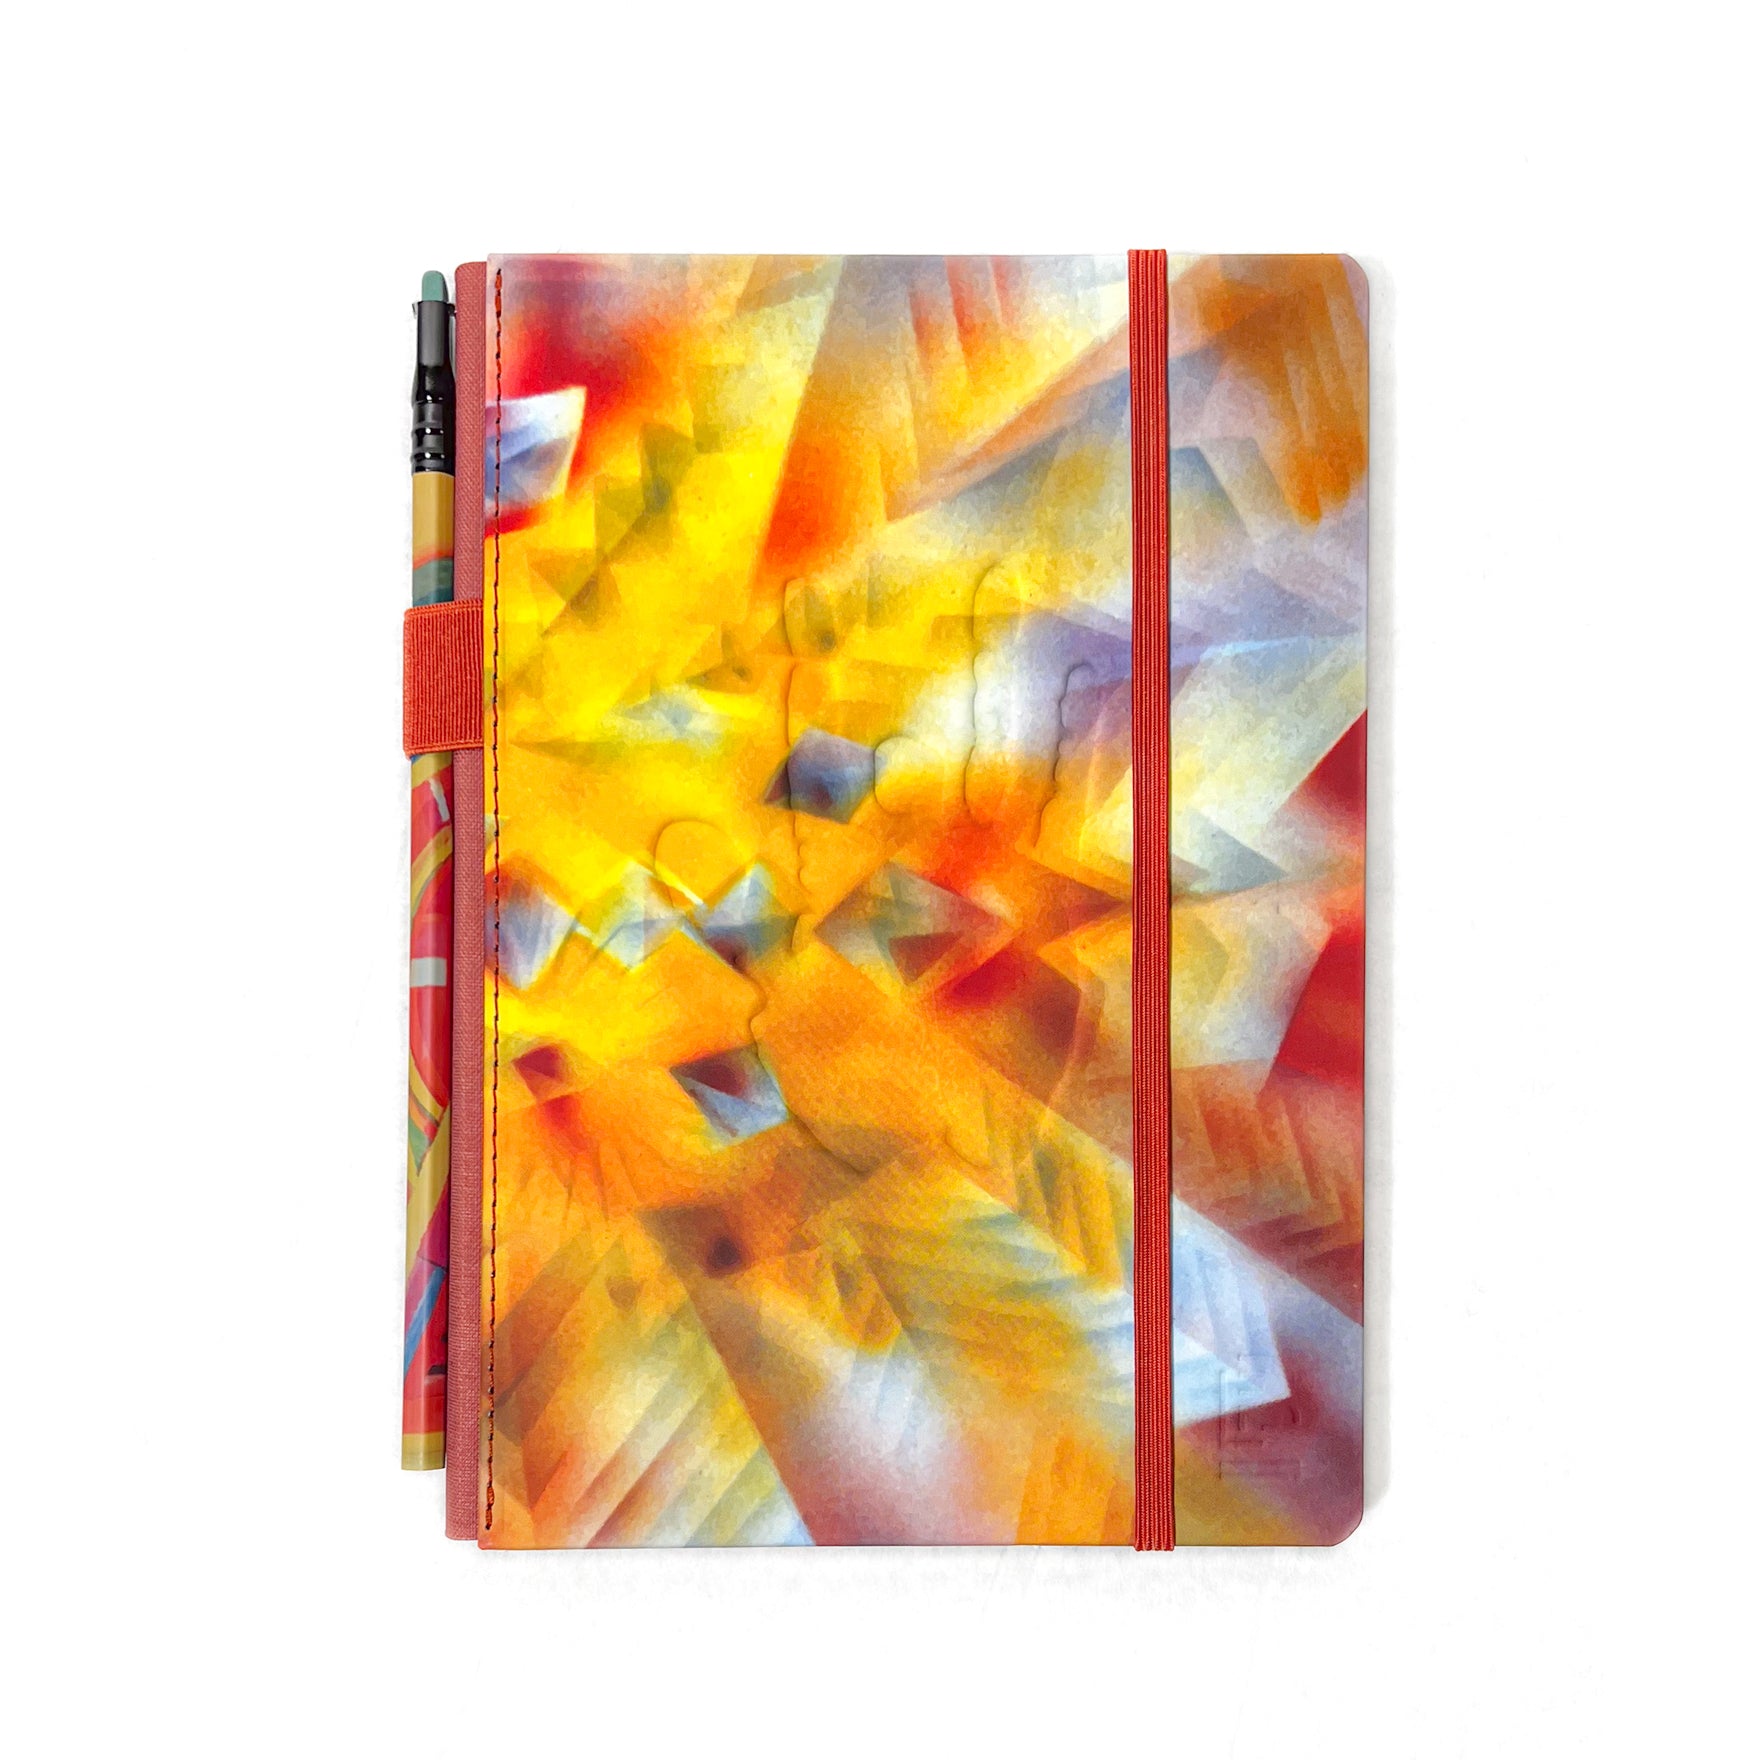 Colorful abstract-patterned Jerry Garcia limited edition journal with a Blackwing Volume 710 Slate Notebook and elastic closure.